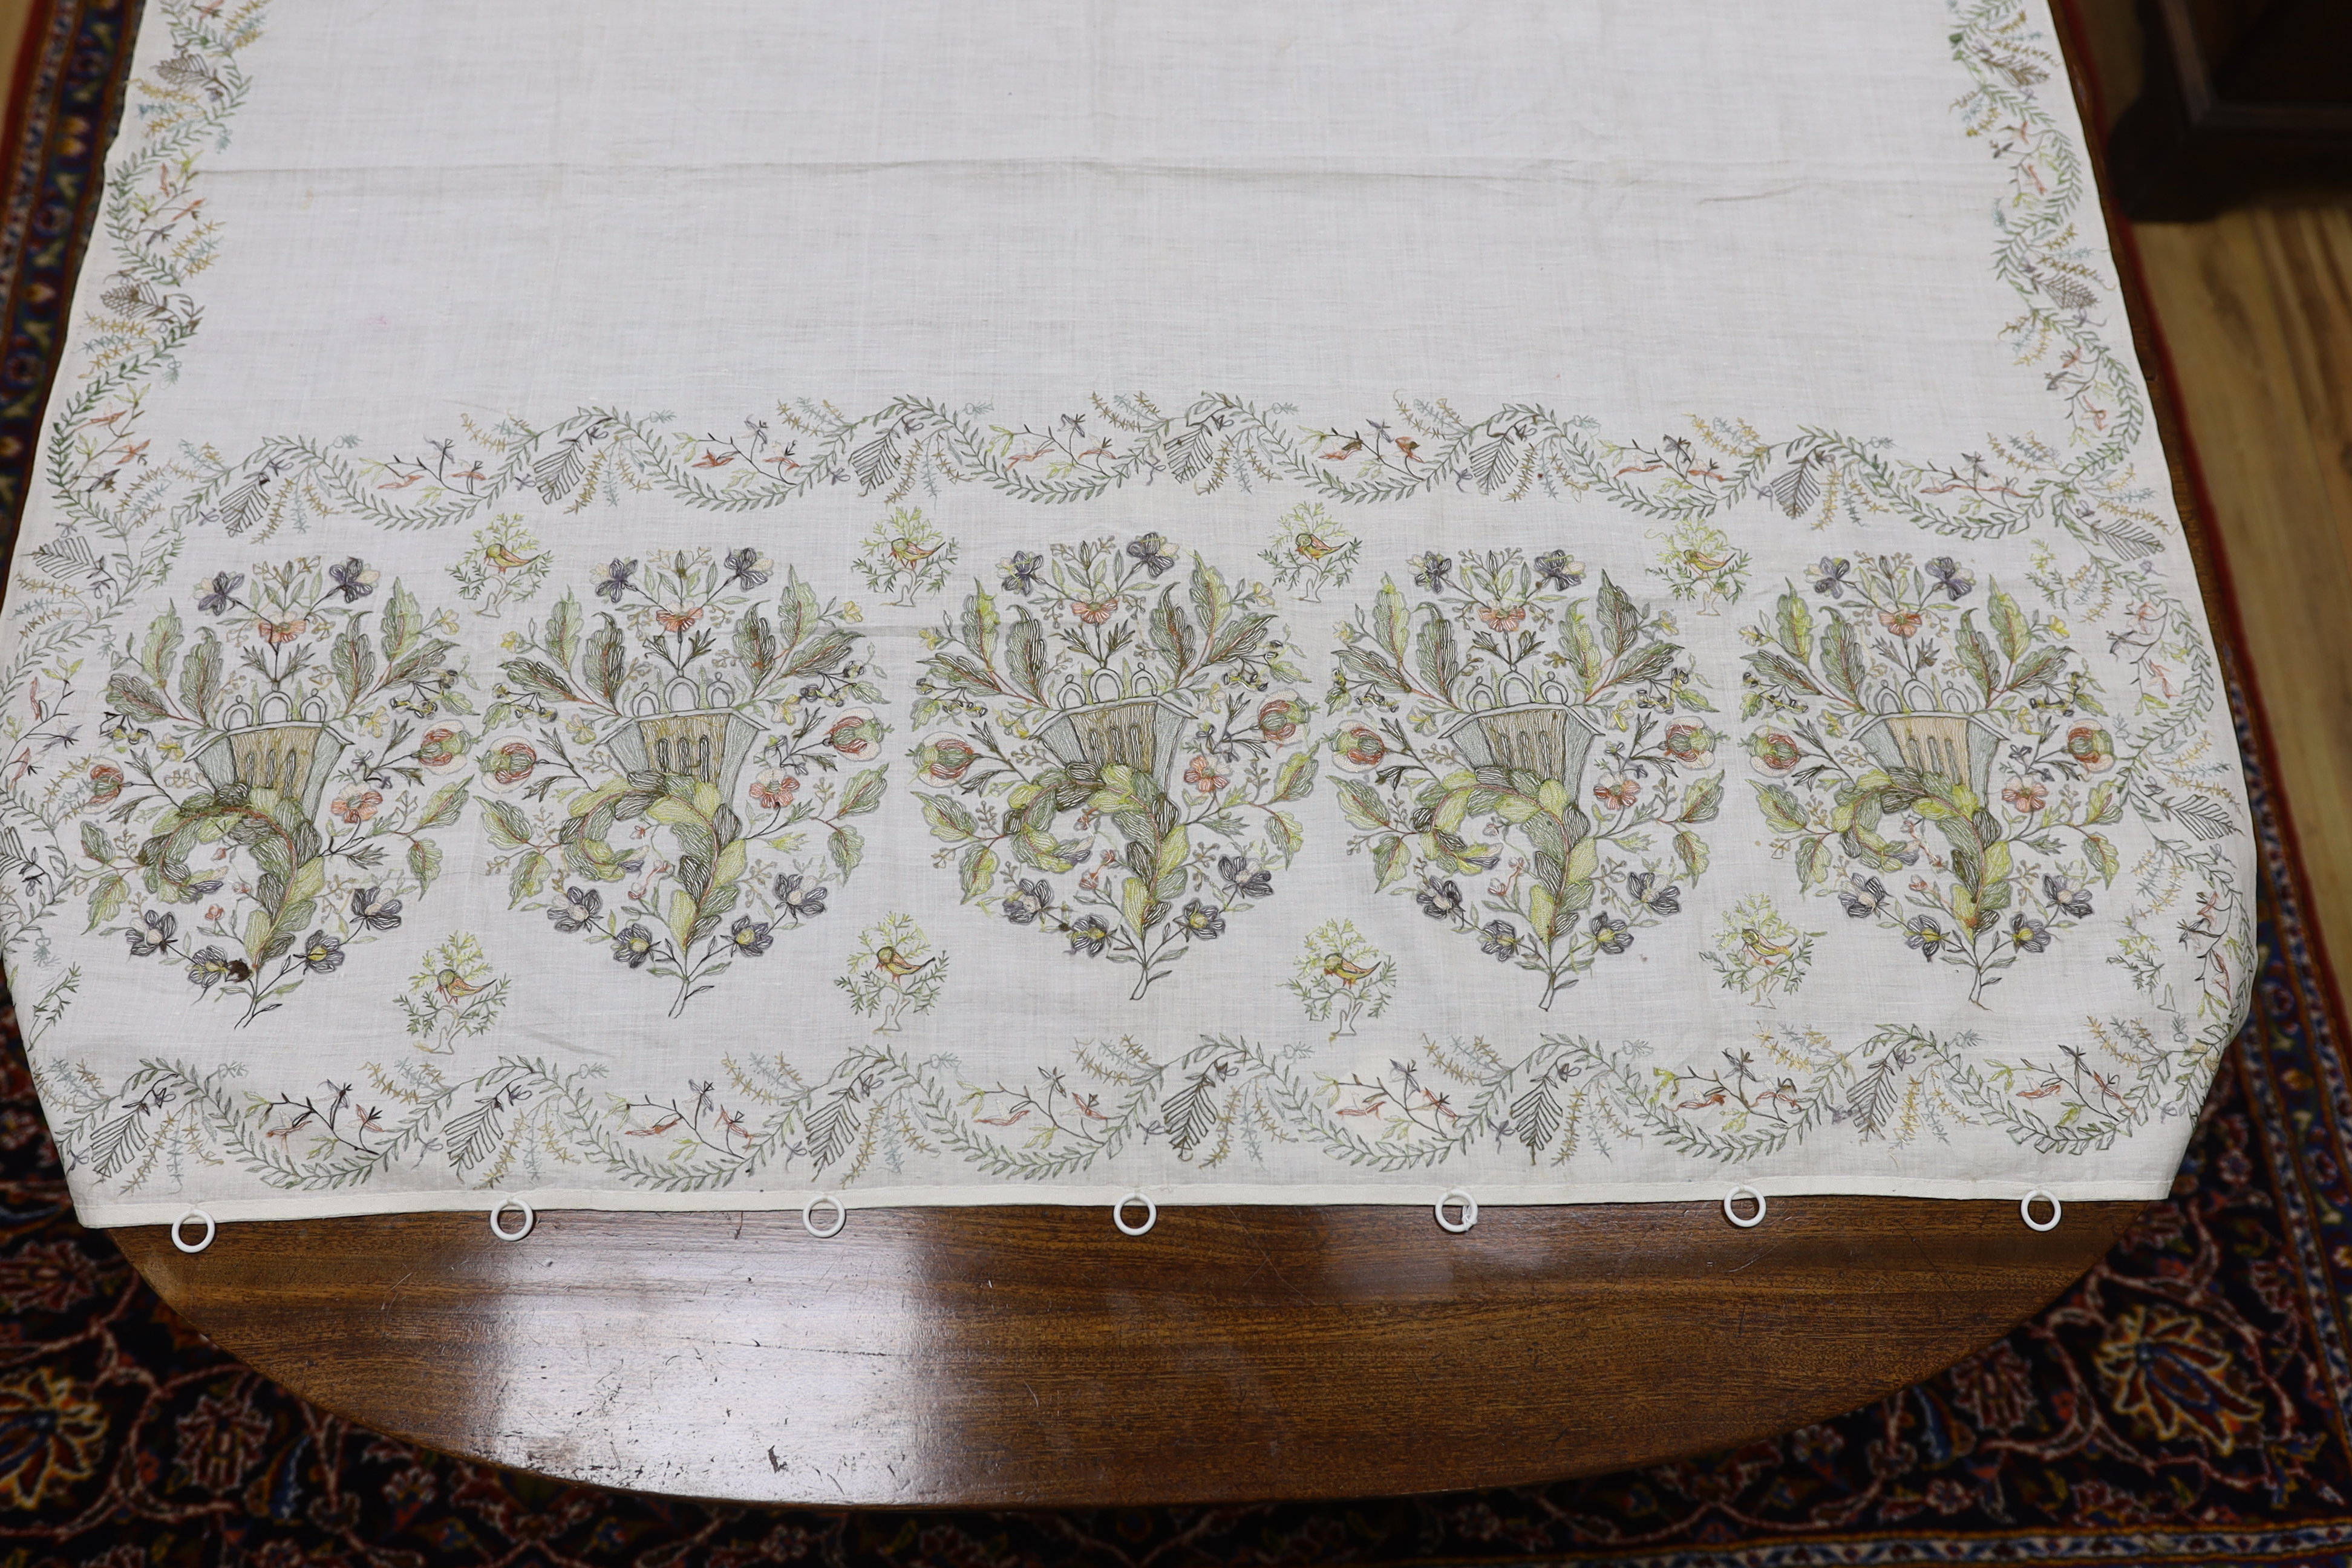 A late 18th-19th century fine linen chain stitched floral embroidered panel, possibly Kashmiri, using traditional design elements and embroidery similar from earlier embroideries of this kind worked on narrower looms, 22